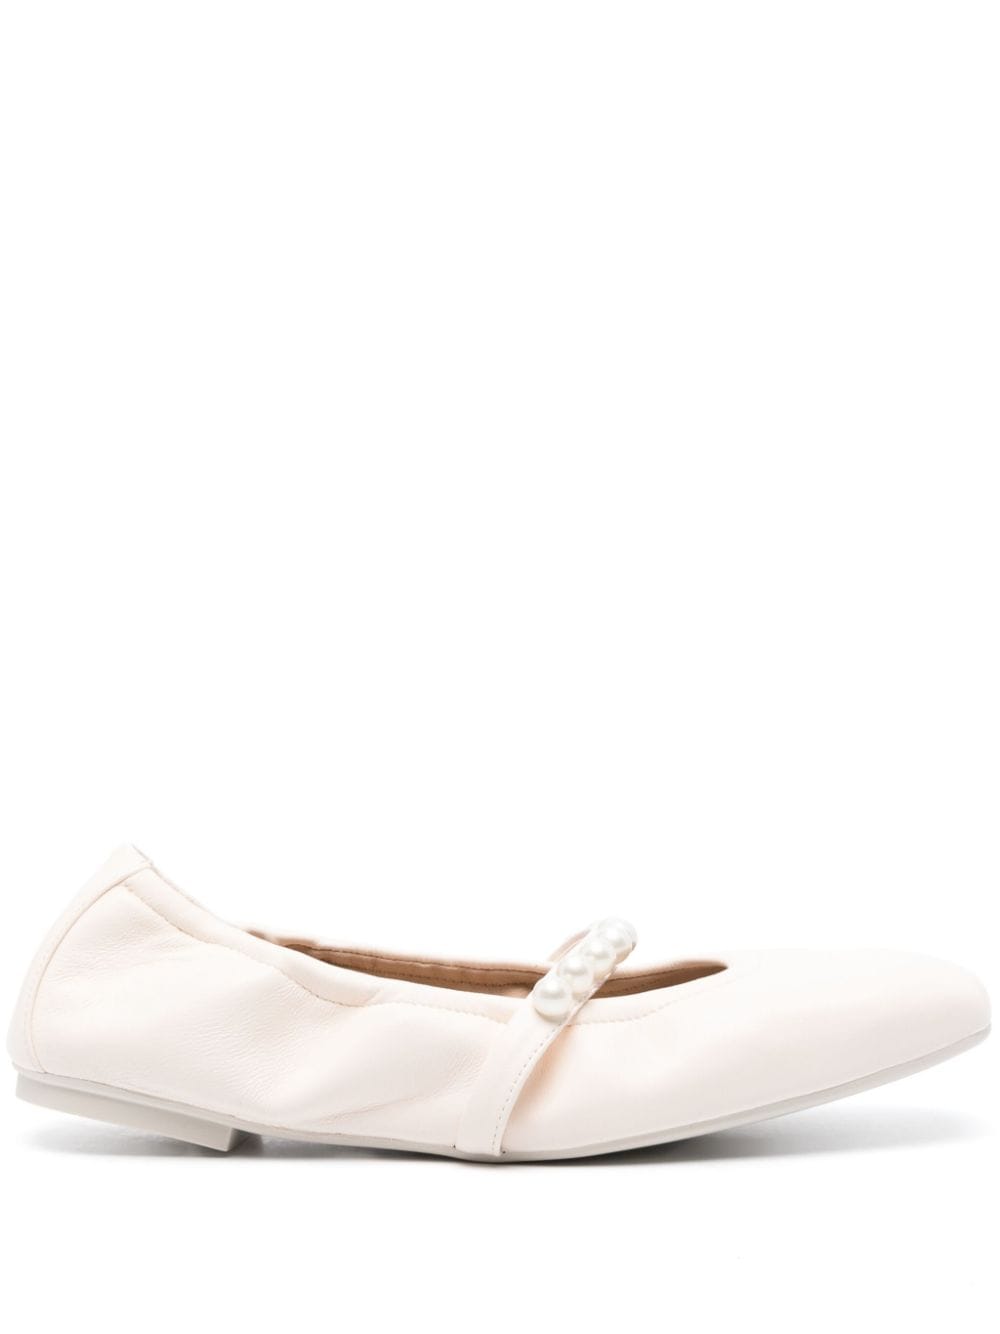 Goldie leather ballerina shoes<BR/>